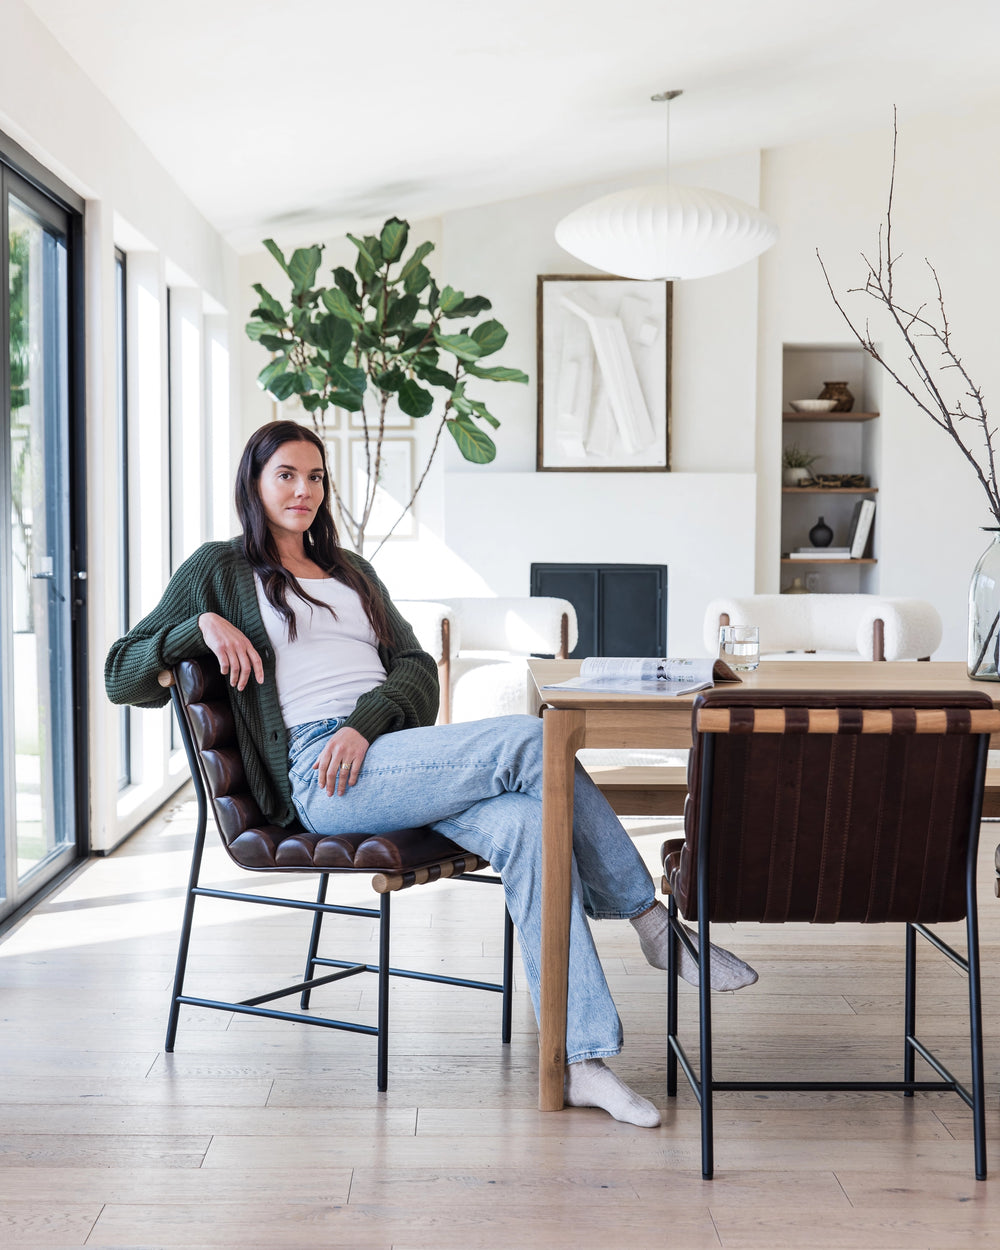 A bright dining room scene with a relaxed woman sitting in a brown leather Vail Dining Chair. She is casually dressed in a white top, green cardigan, and blue jeans, with her legs crossed. The dining table is made of light wood with contrasting dark stripes, matching the chair. 